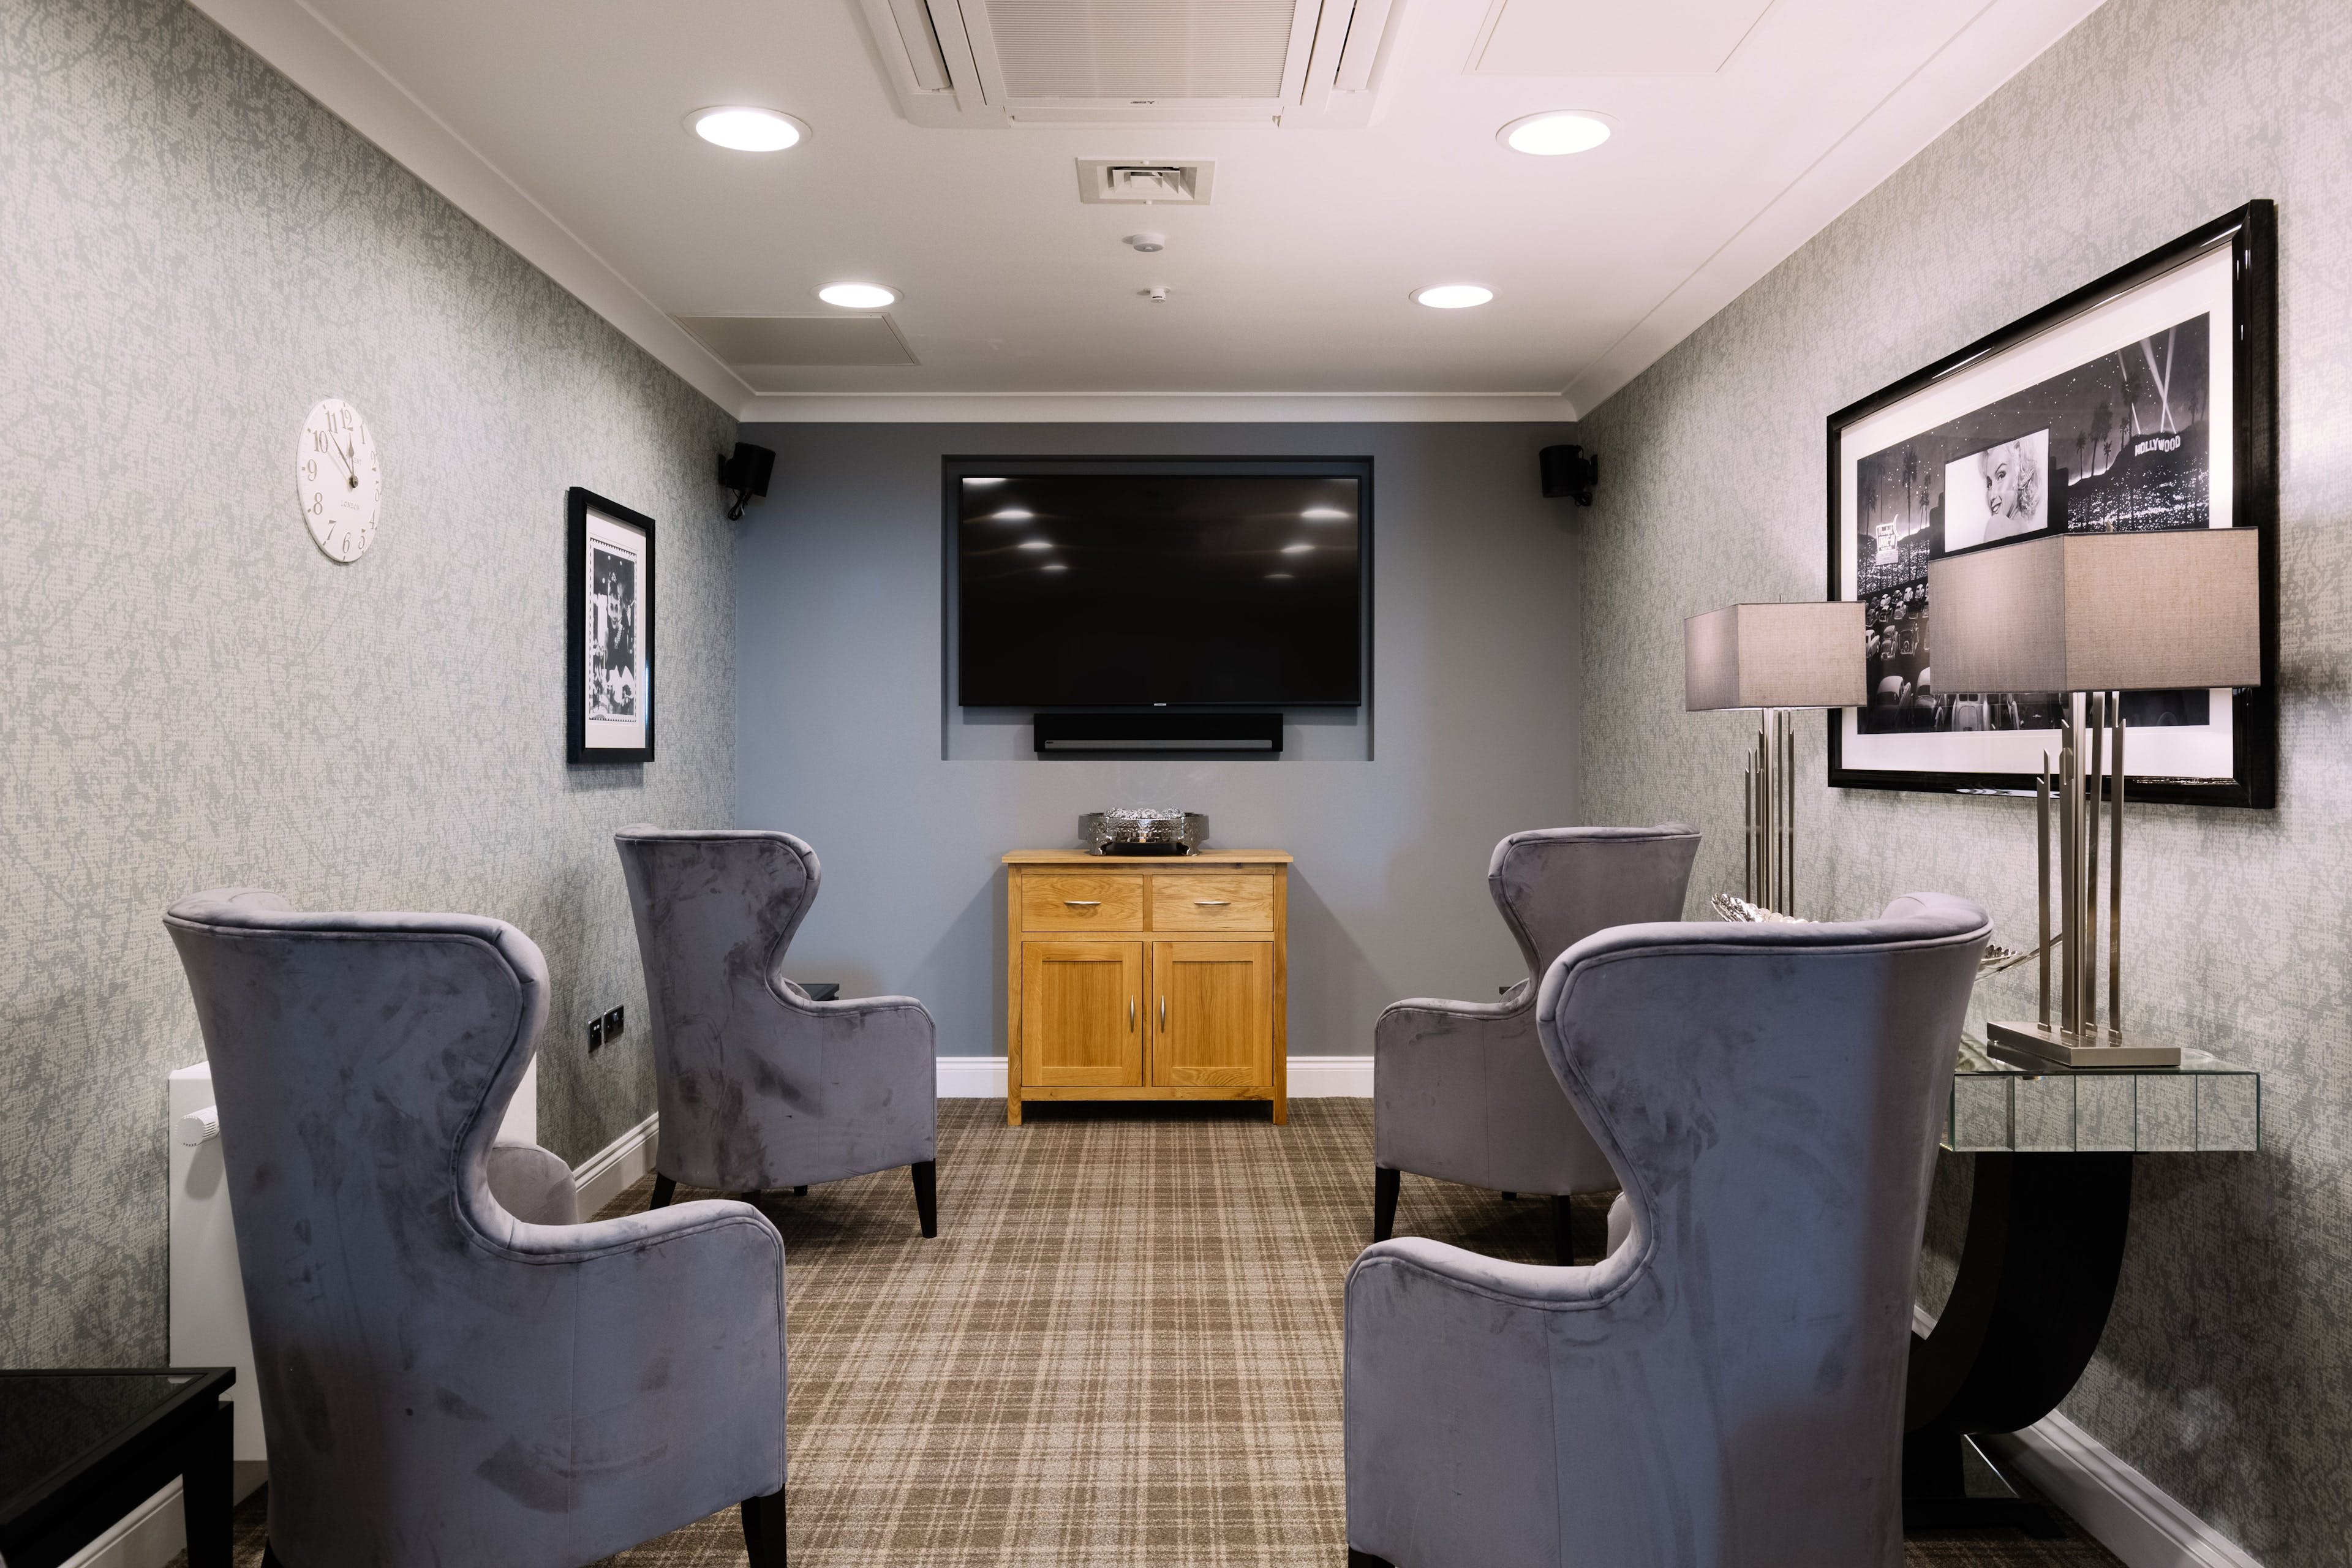 Cinema at Ouse View Care Home in York, North Yorkshire